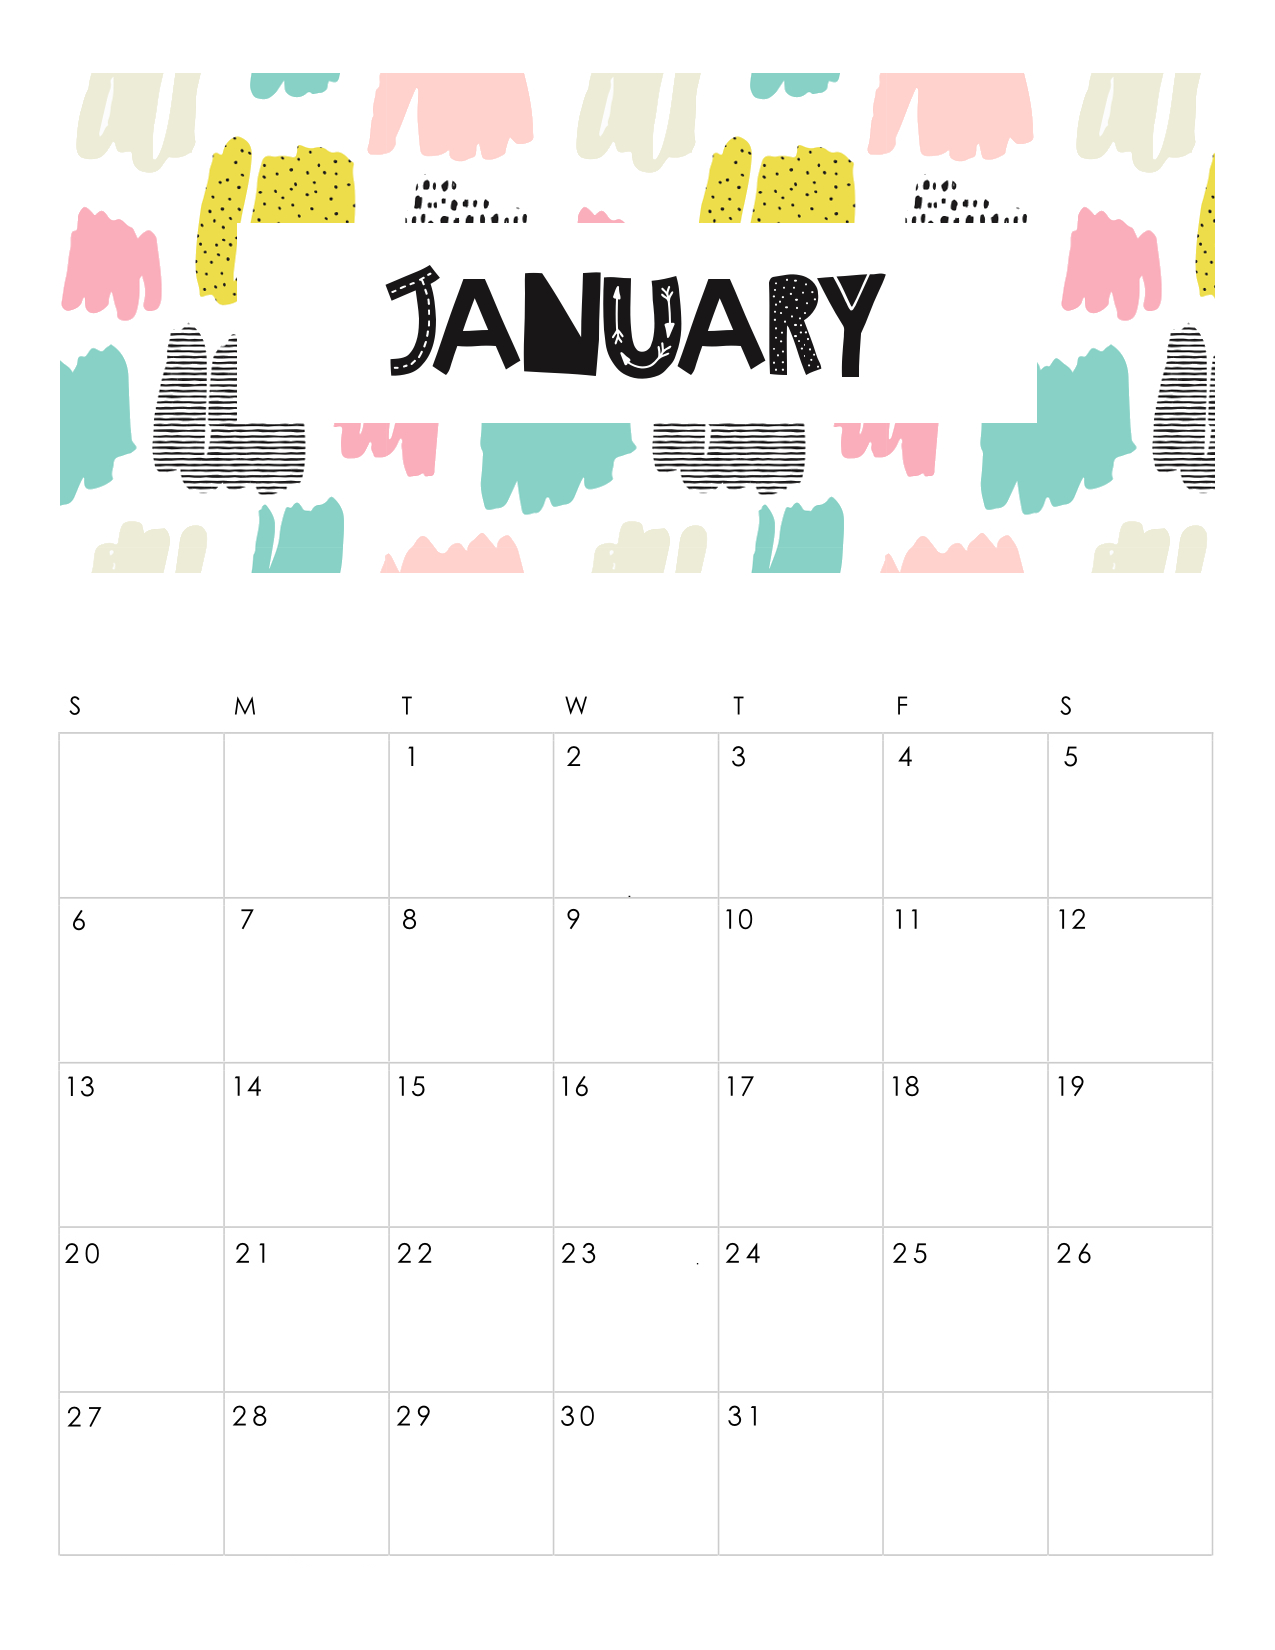 free-printable-abstract-patterned-calendar-2019-january.jpg